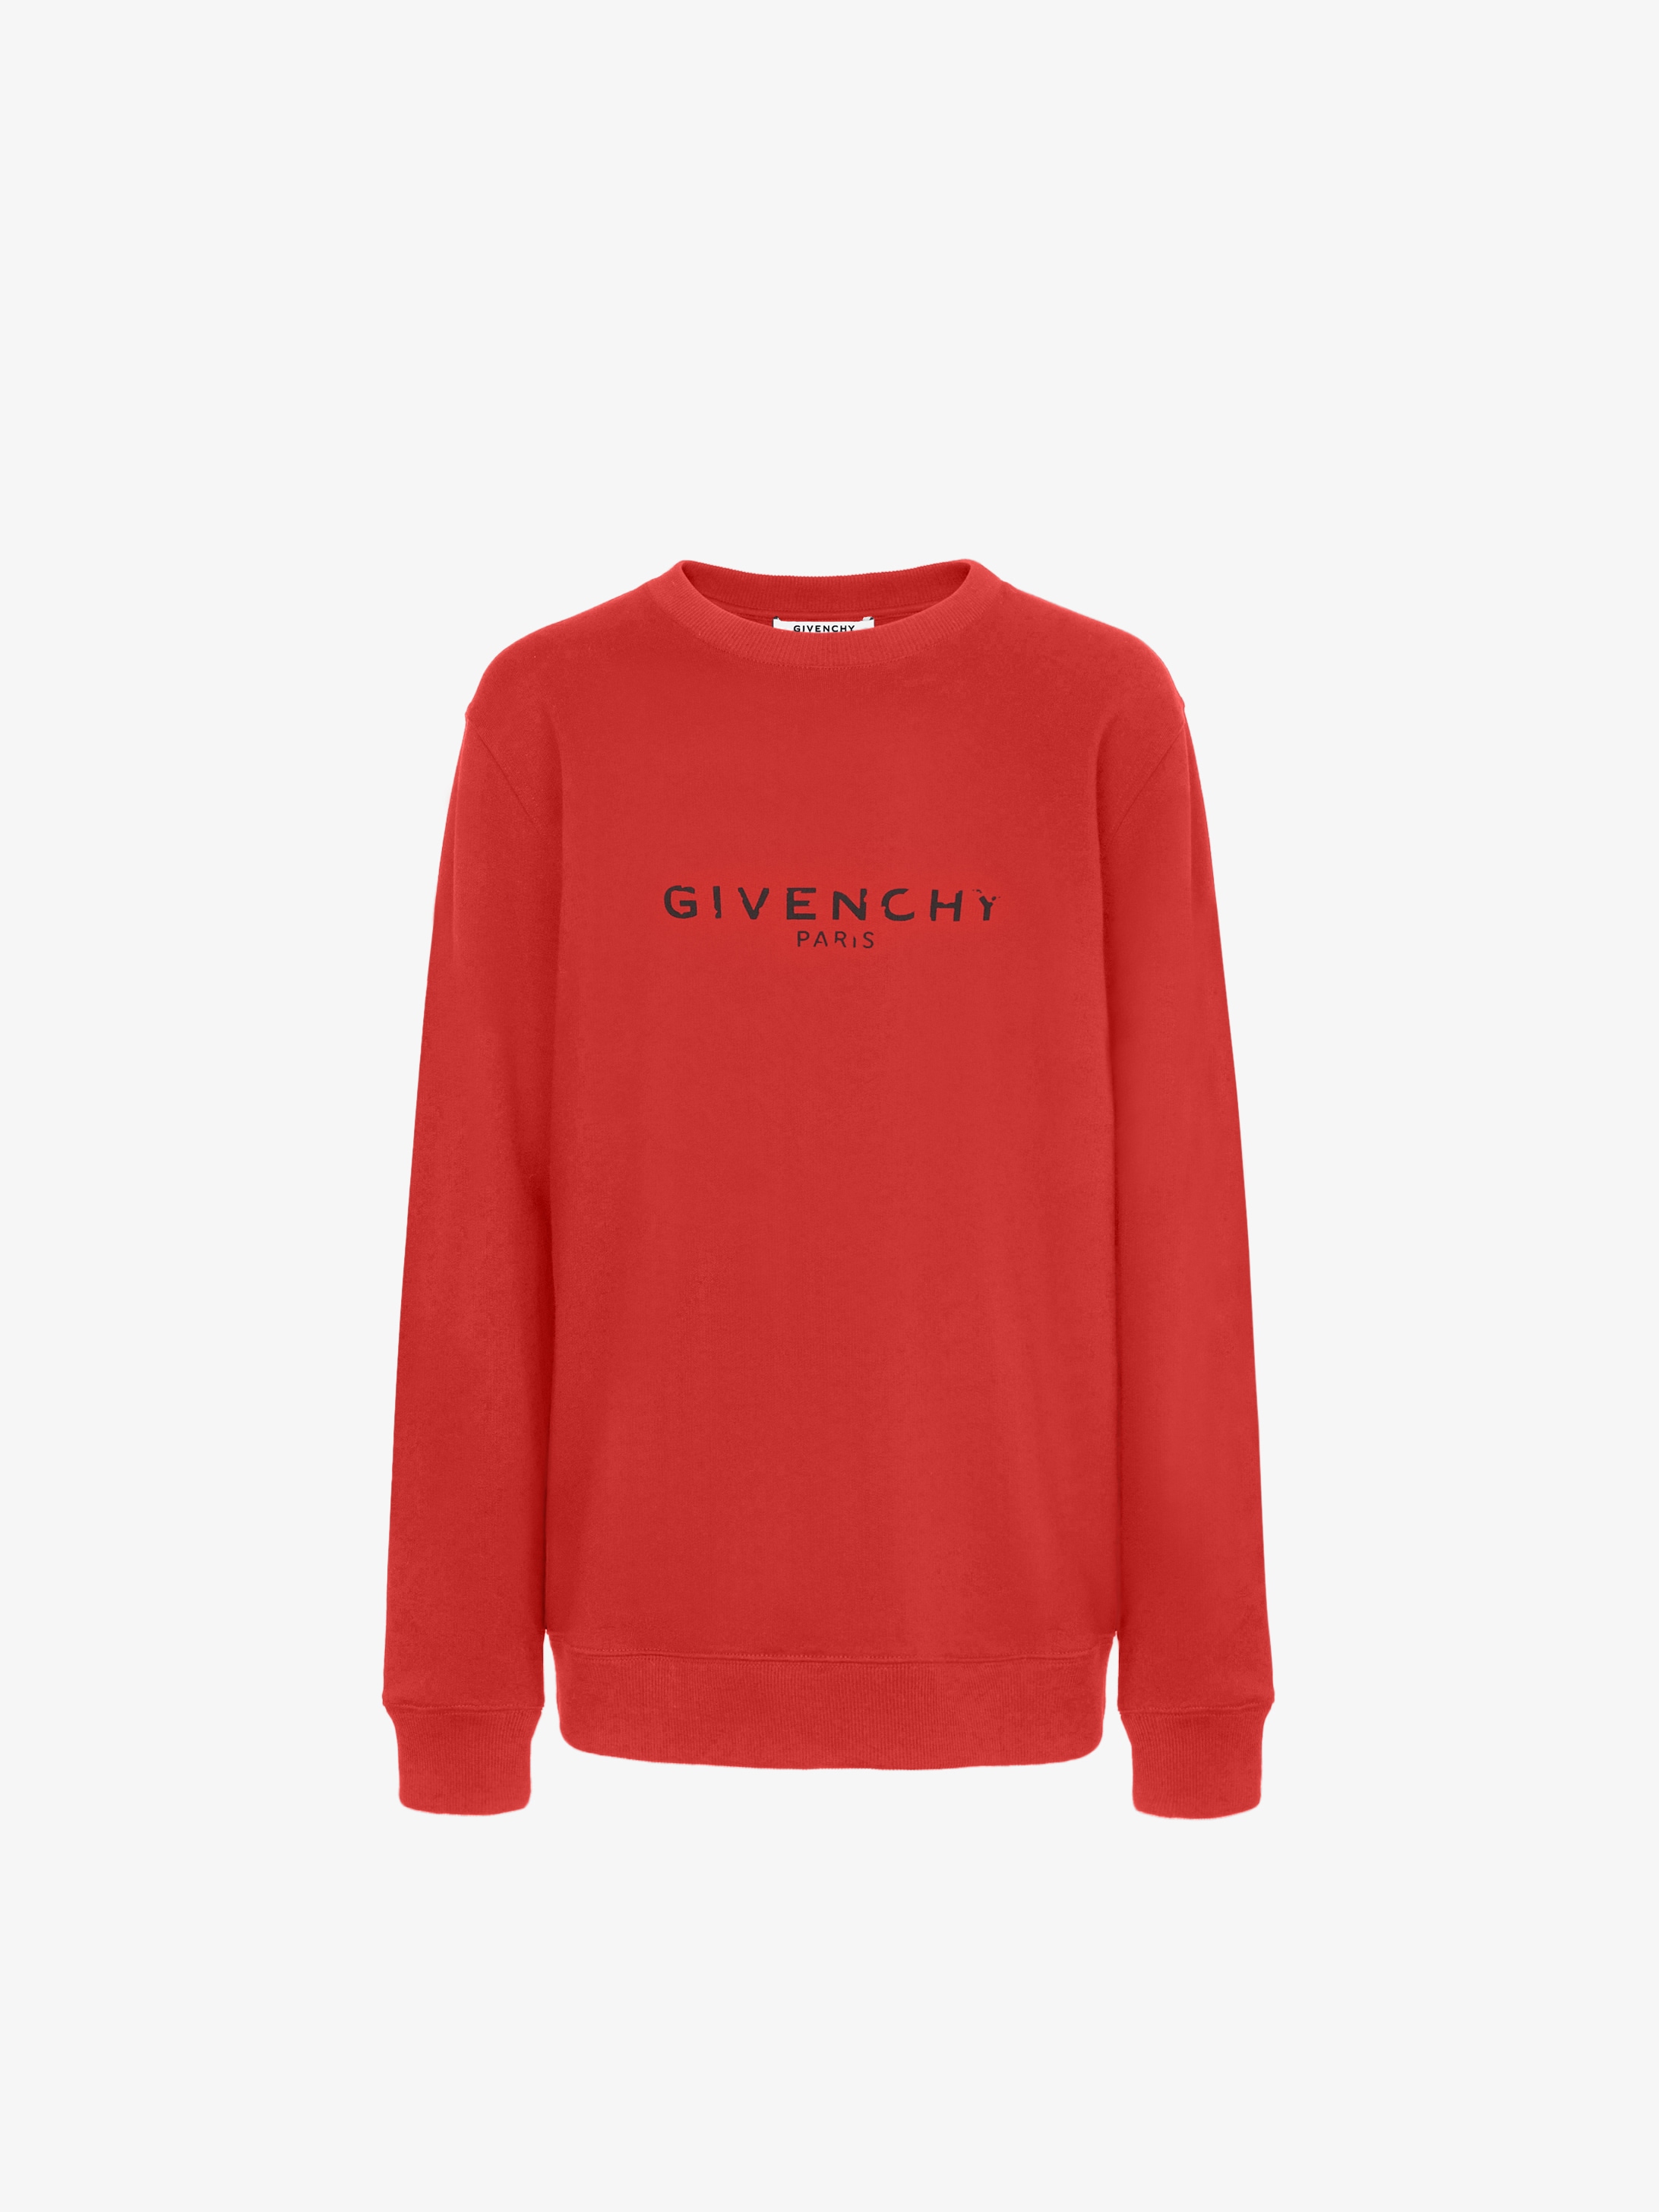 givenchy paris hoodie red